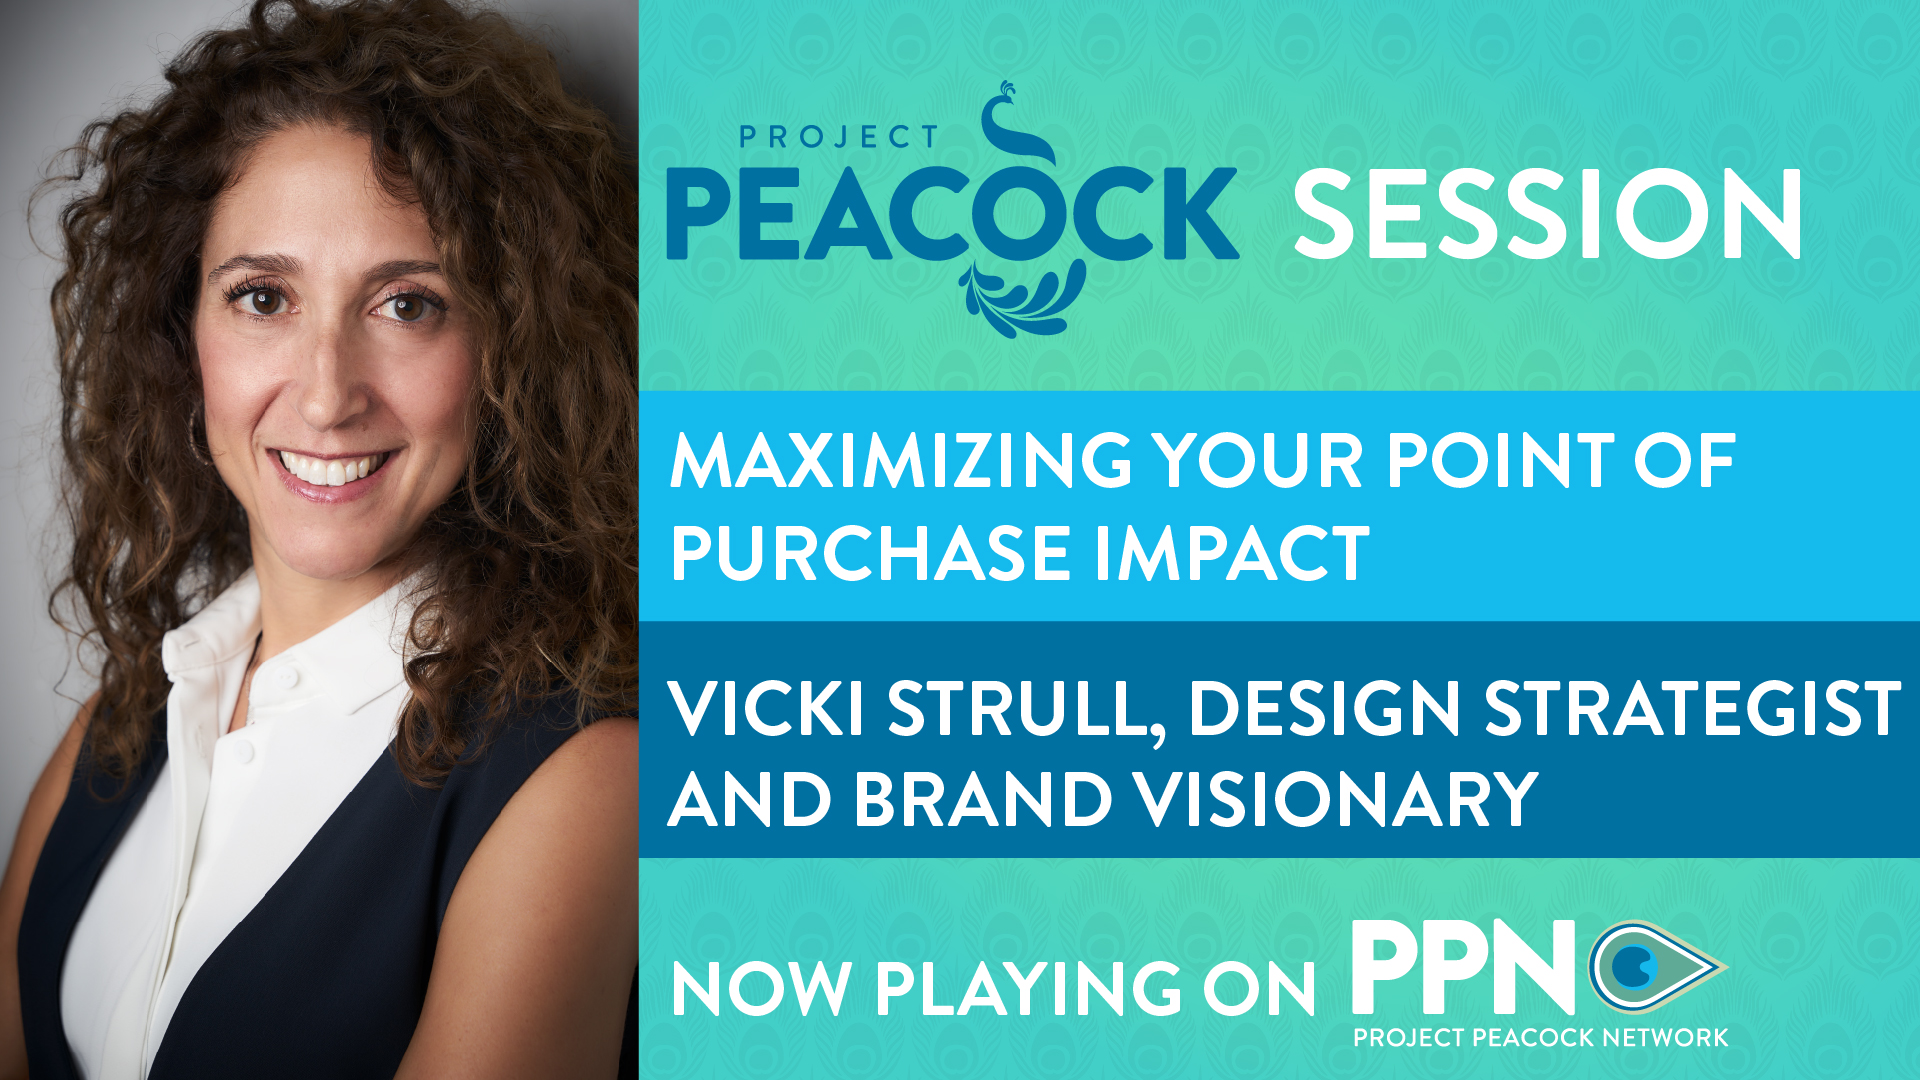 PROJECT PEACOCK: MAXIMIZING YOUR POINT OF PURCHASE AND PACKAGING IMPACT